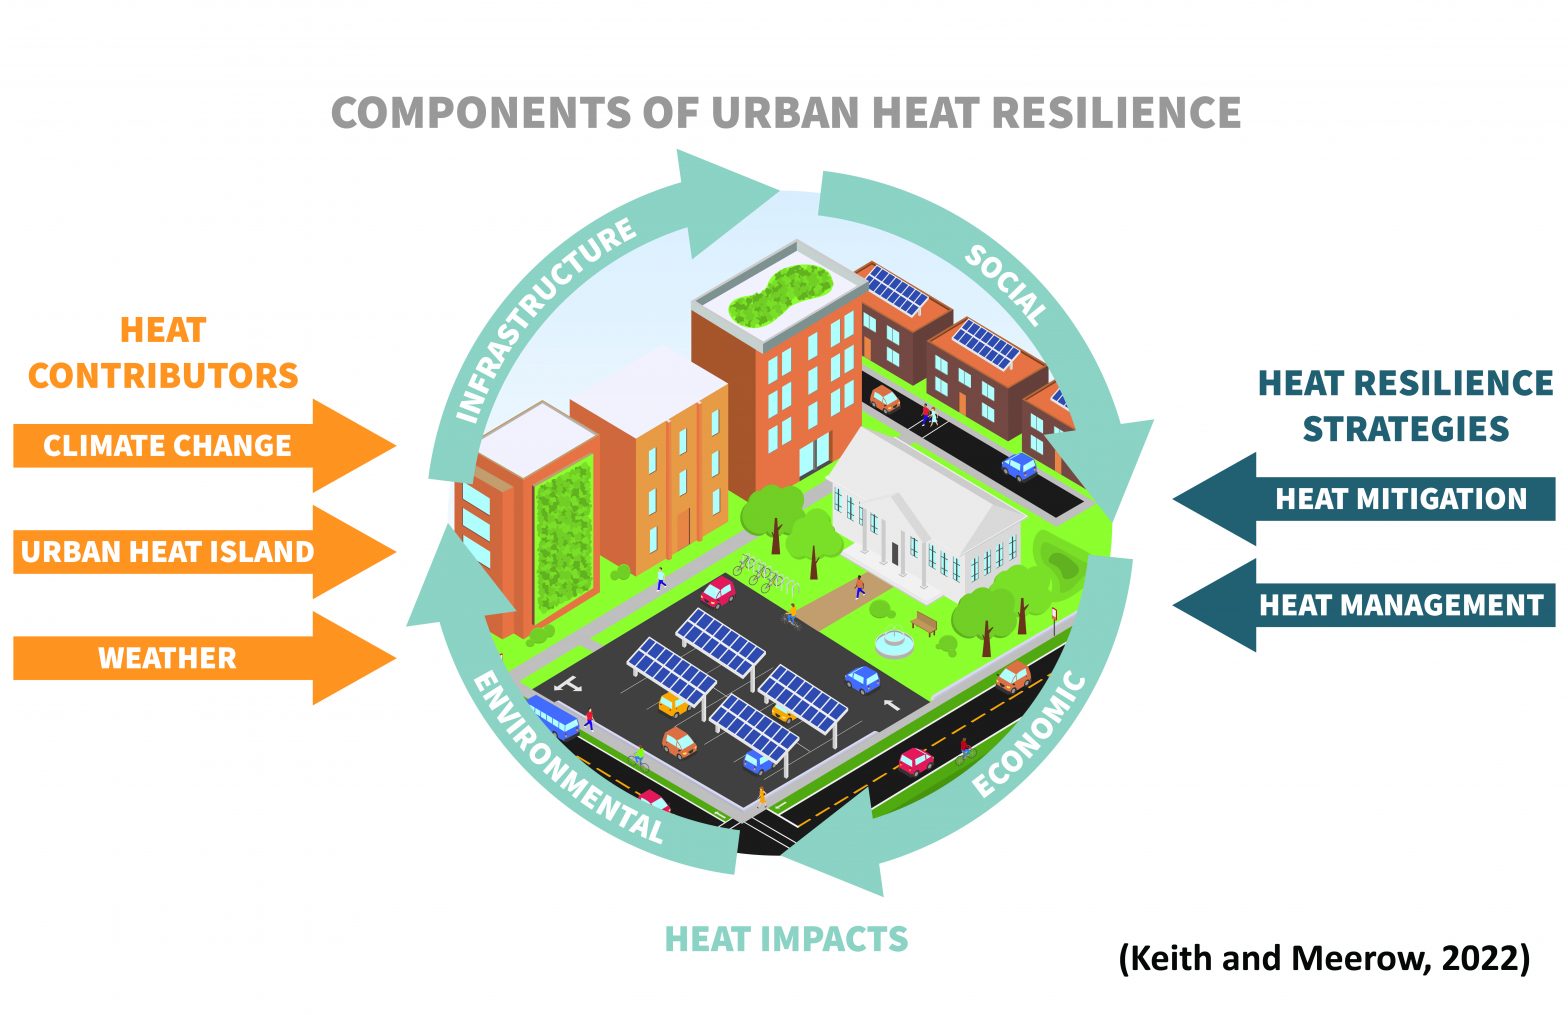 Planning for Urban Heat Resilience